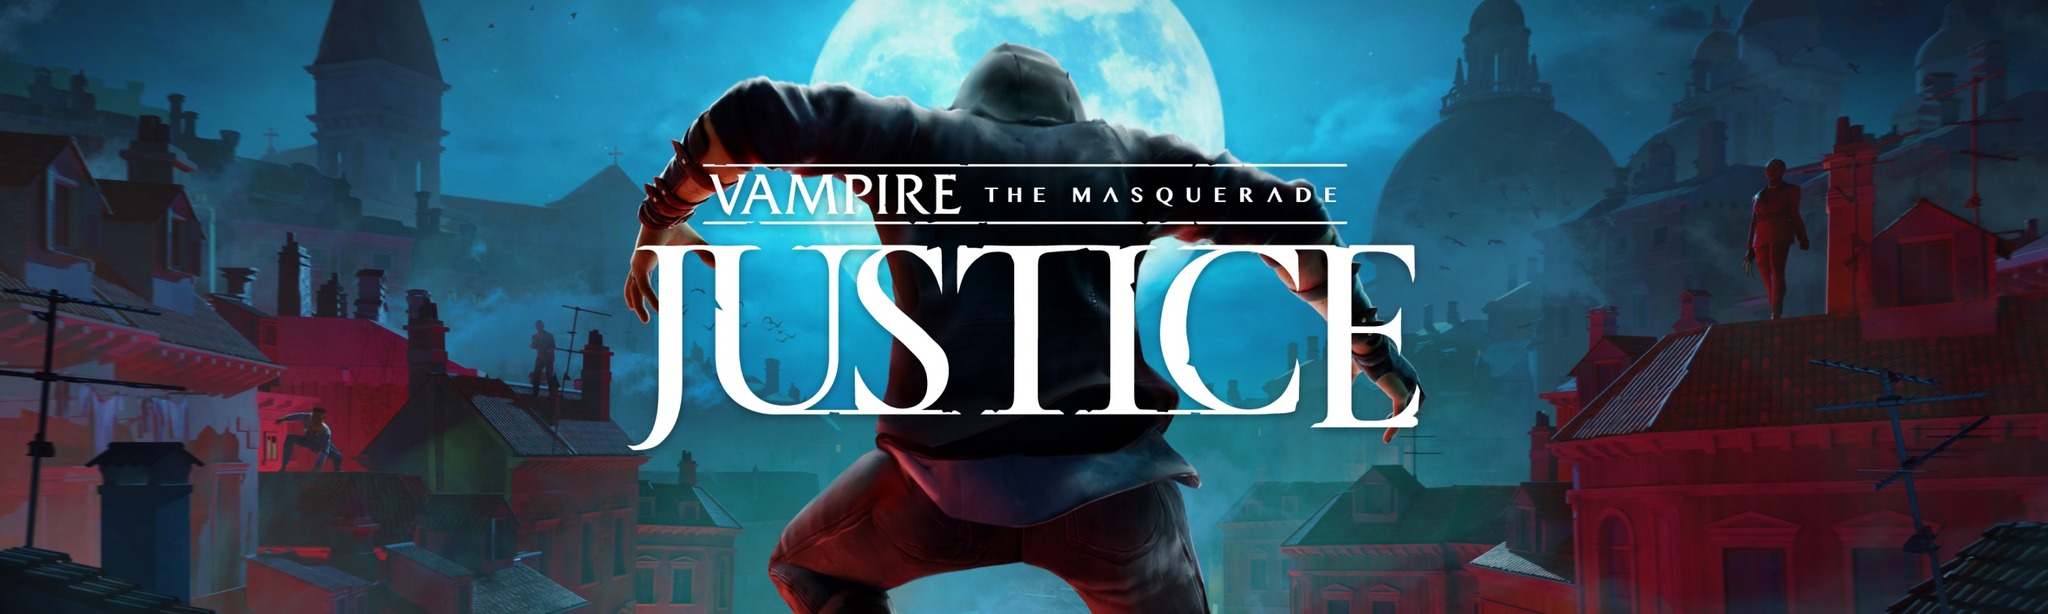 Vampire: The Masquerade-Justice Review - Bloodsucking in VR